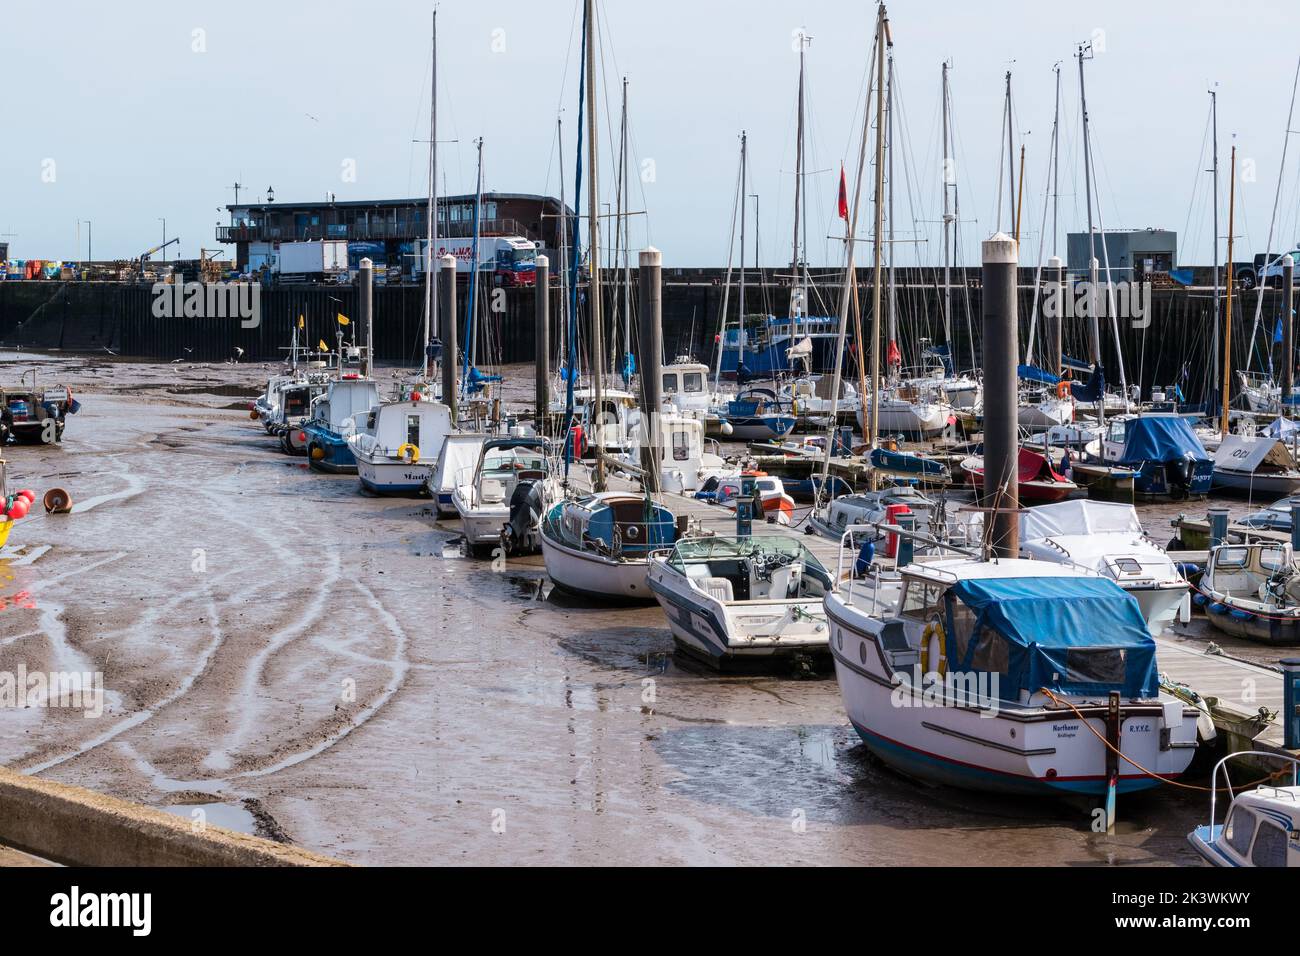 The harbour side in the Yorkshire seaside town of Bridlington, East Yorkshire with lots of small boats moored in the dock. Stock Photo